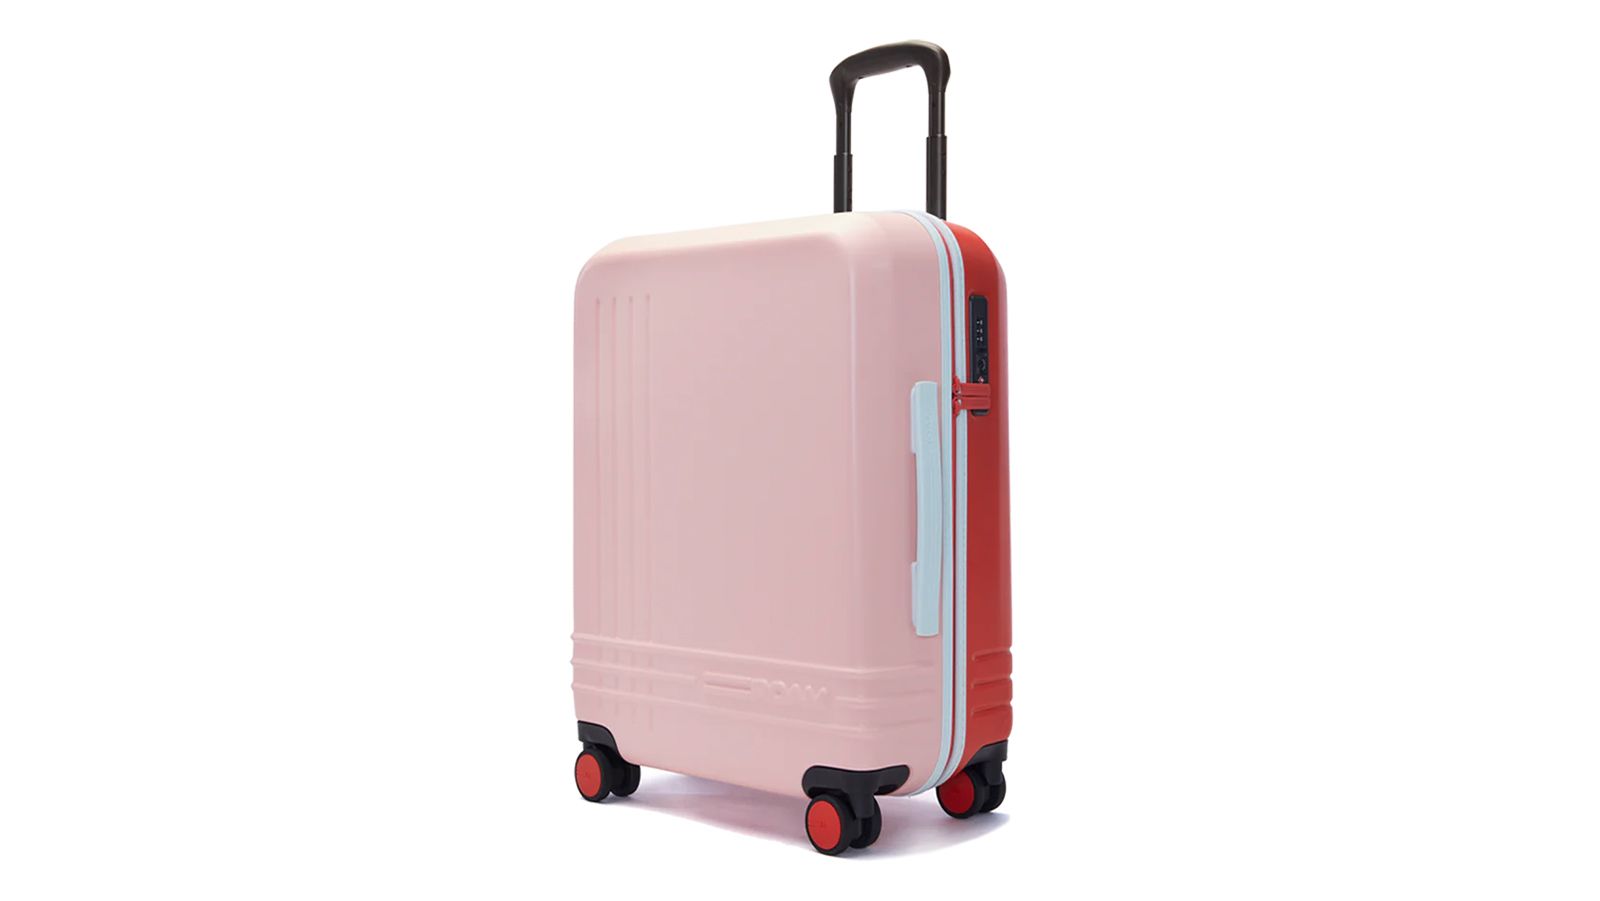 bag carry on luggage size